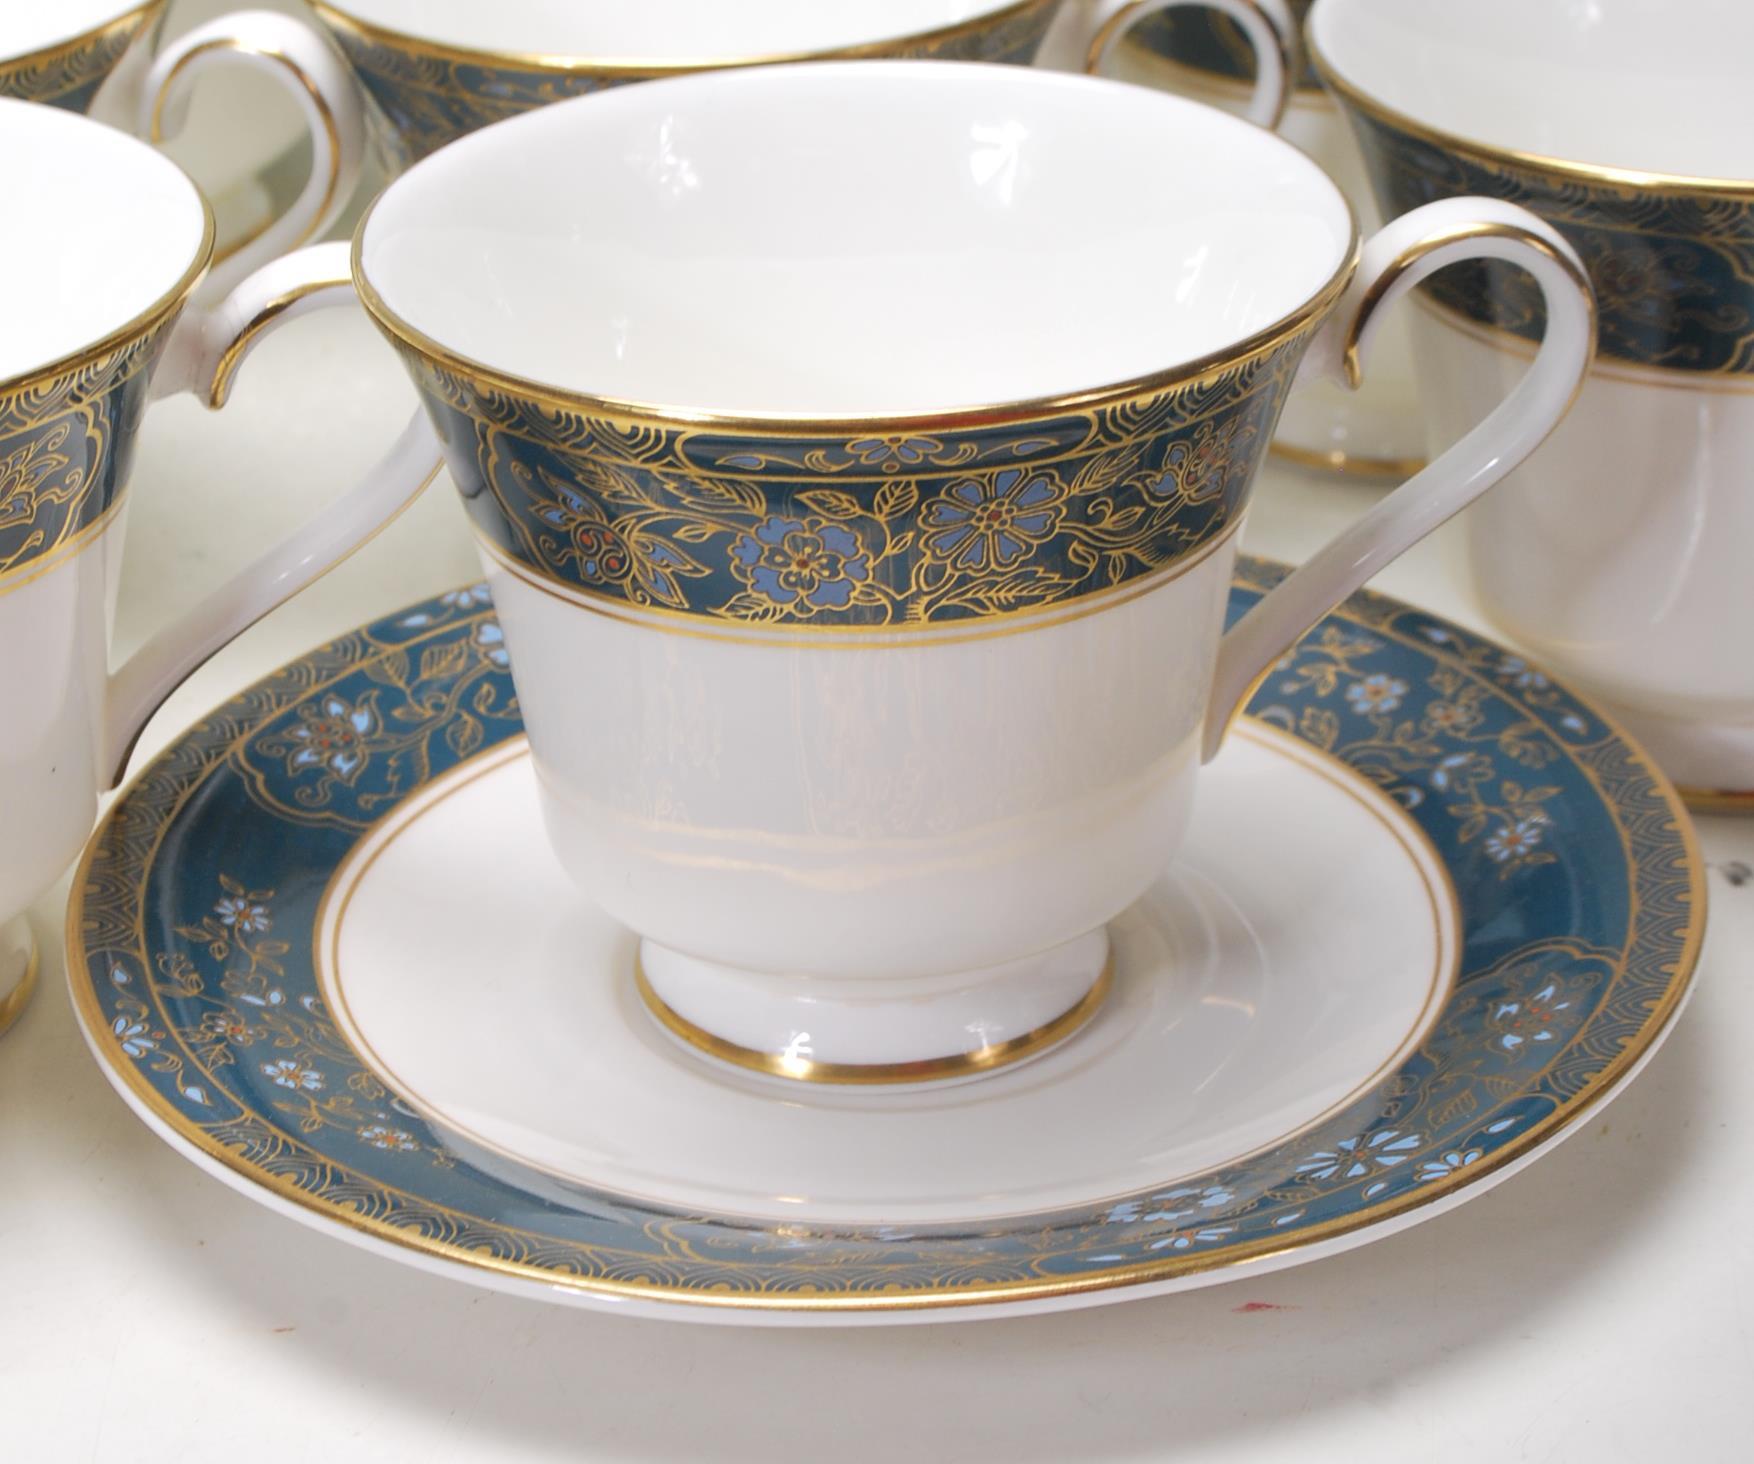 COLLECTION OF LATE 20TH CENTORUY ROYAL DOULTON FINE BONE CHINA DINNER SERVICE - Image 4 of 8